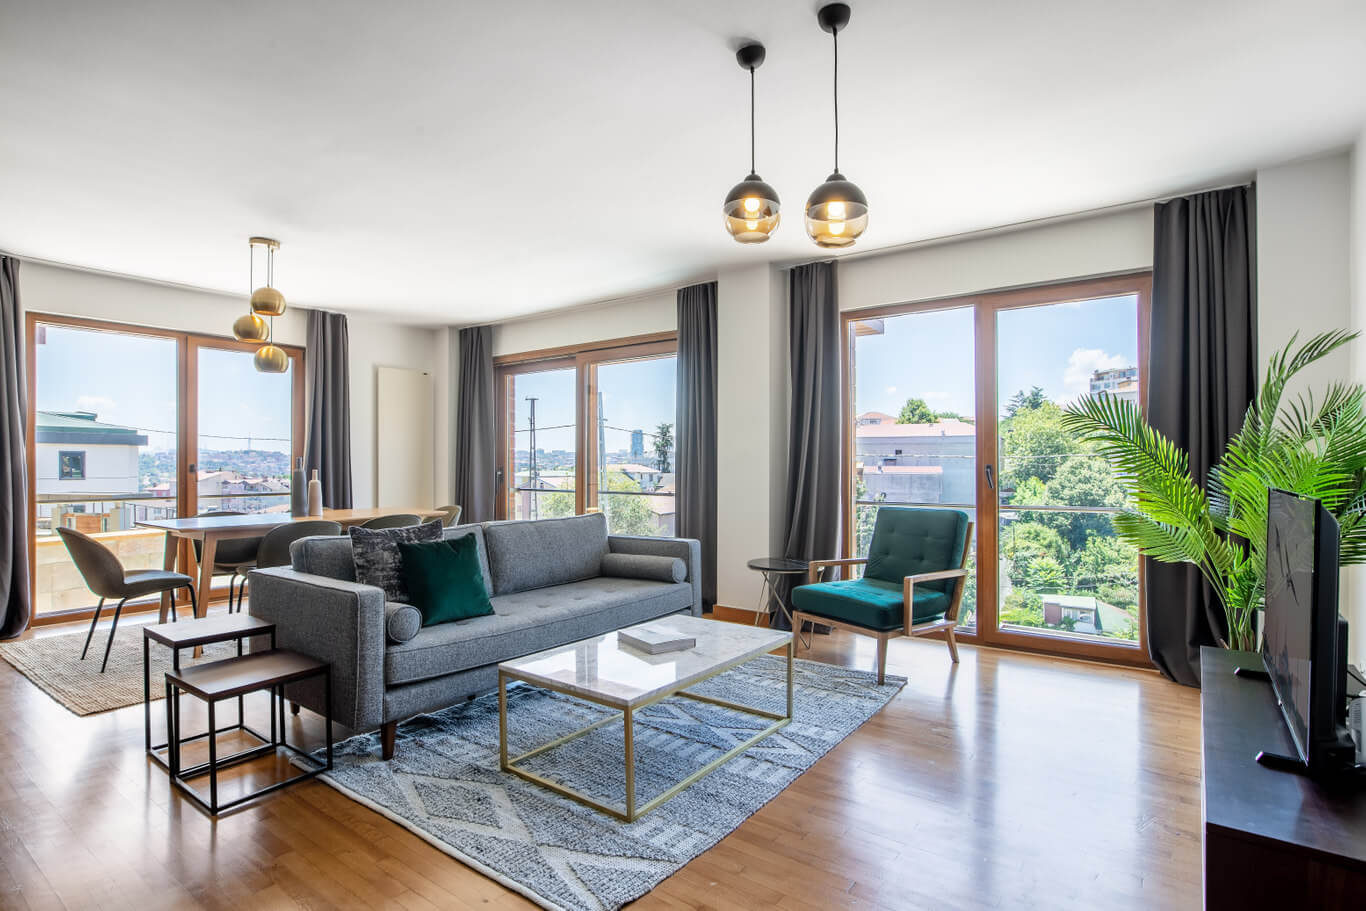 A furnished and equipped apartment in Istanbul, Turkey managed by Blueground. There is a grey couch and a white marble coffee table over a grey rug. There are many windows on each wall and hanging light fixtures on the ceiling